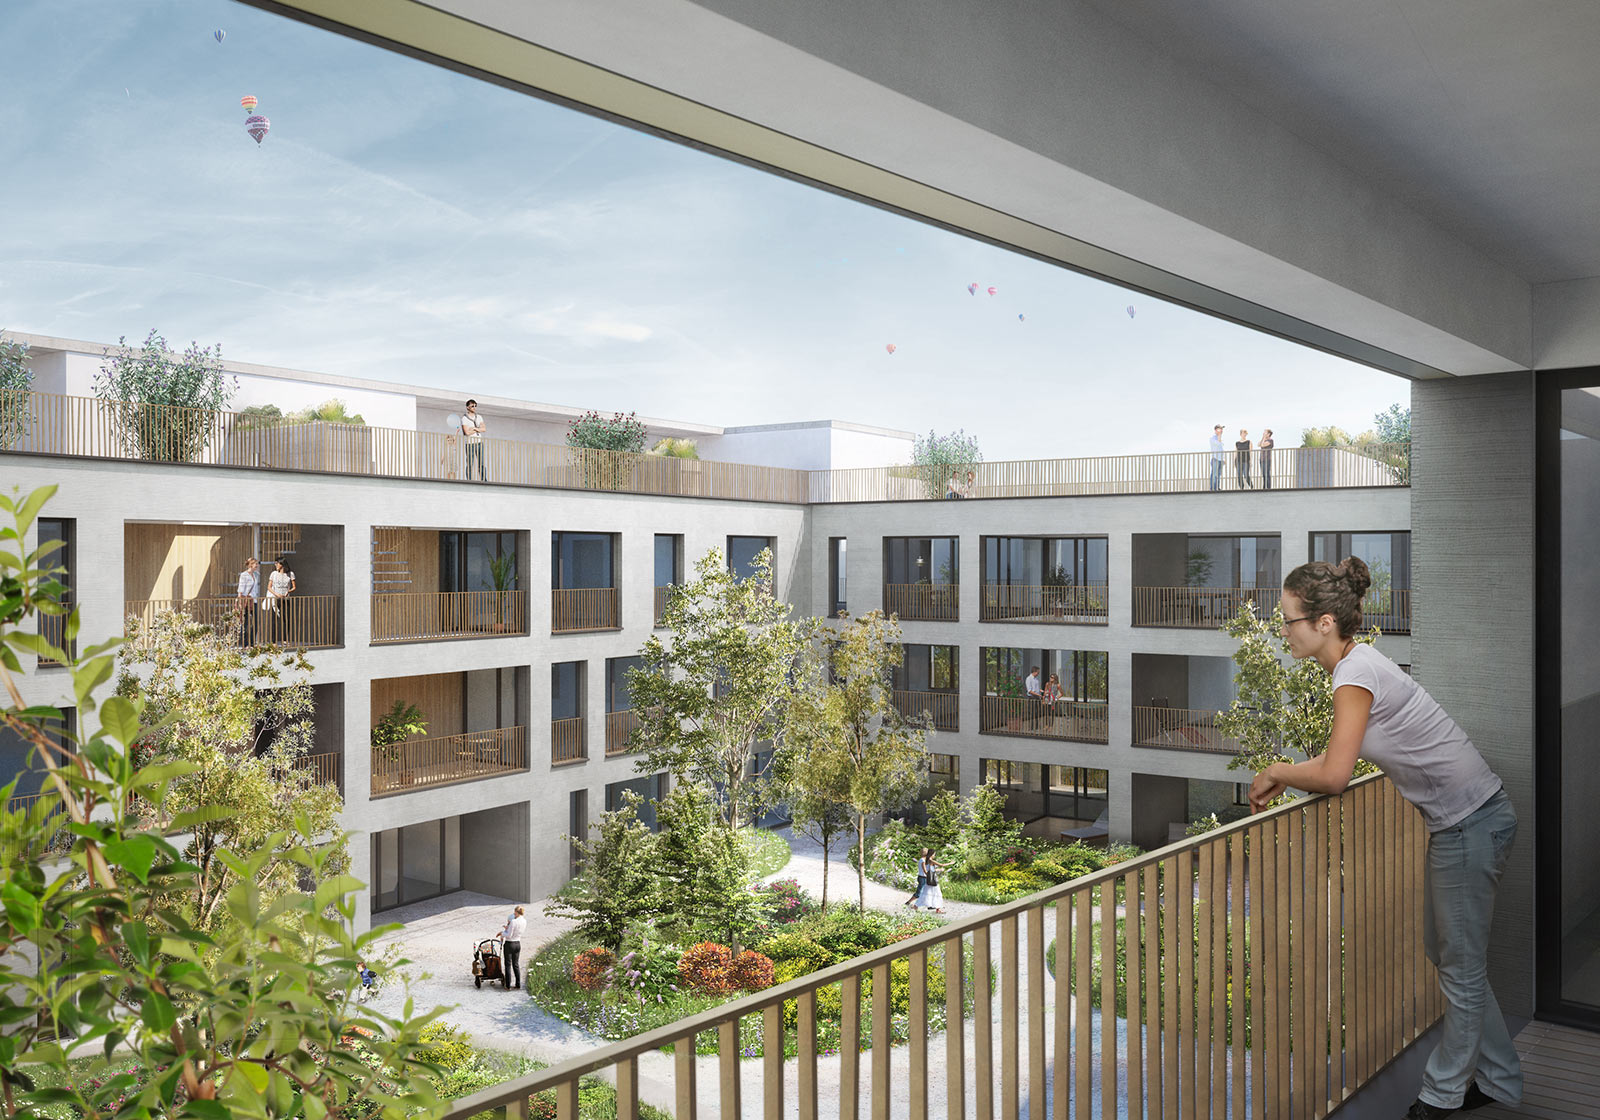 Each residential unit has a balcony and some have roof terraces – this one has a view into the green internal courtyard. Visualization: ATP architects engineers